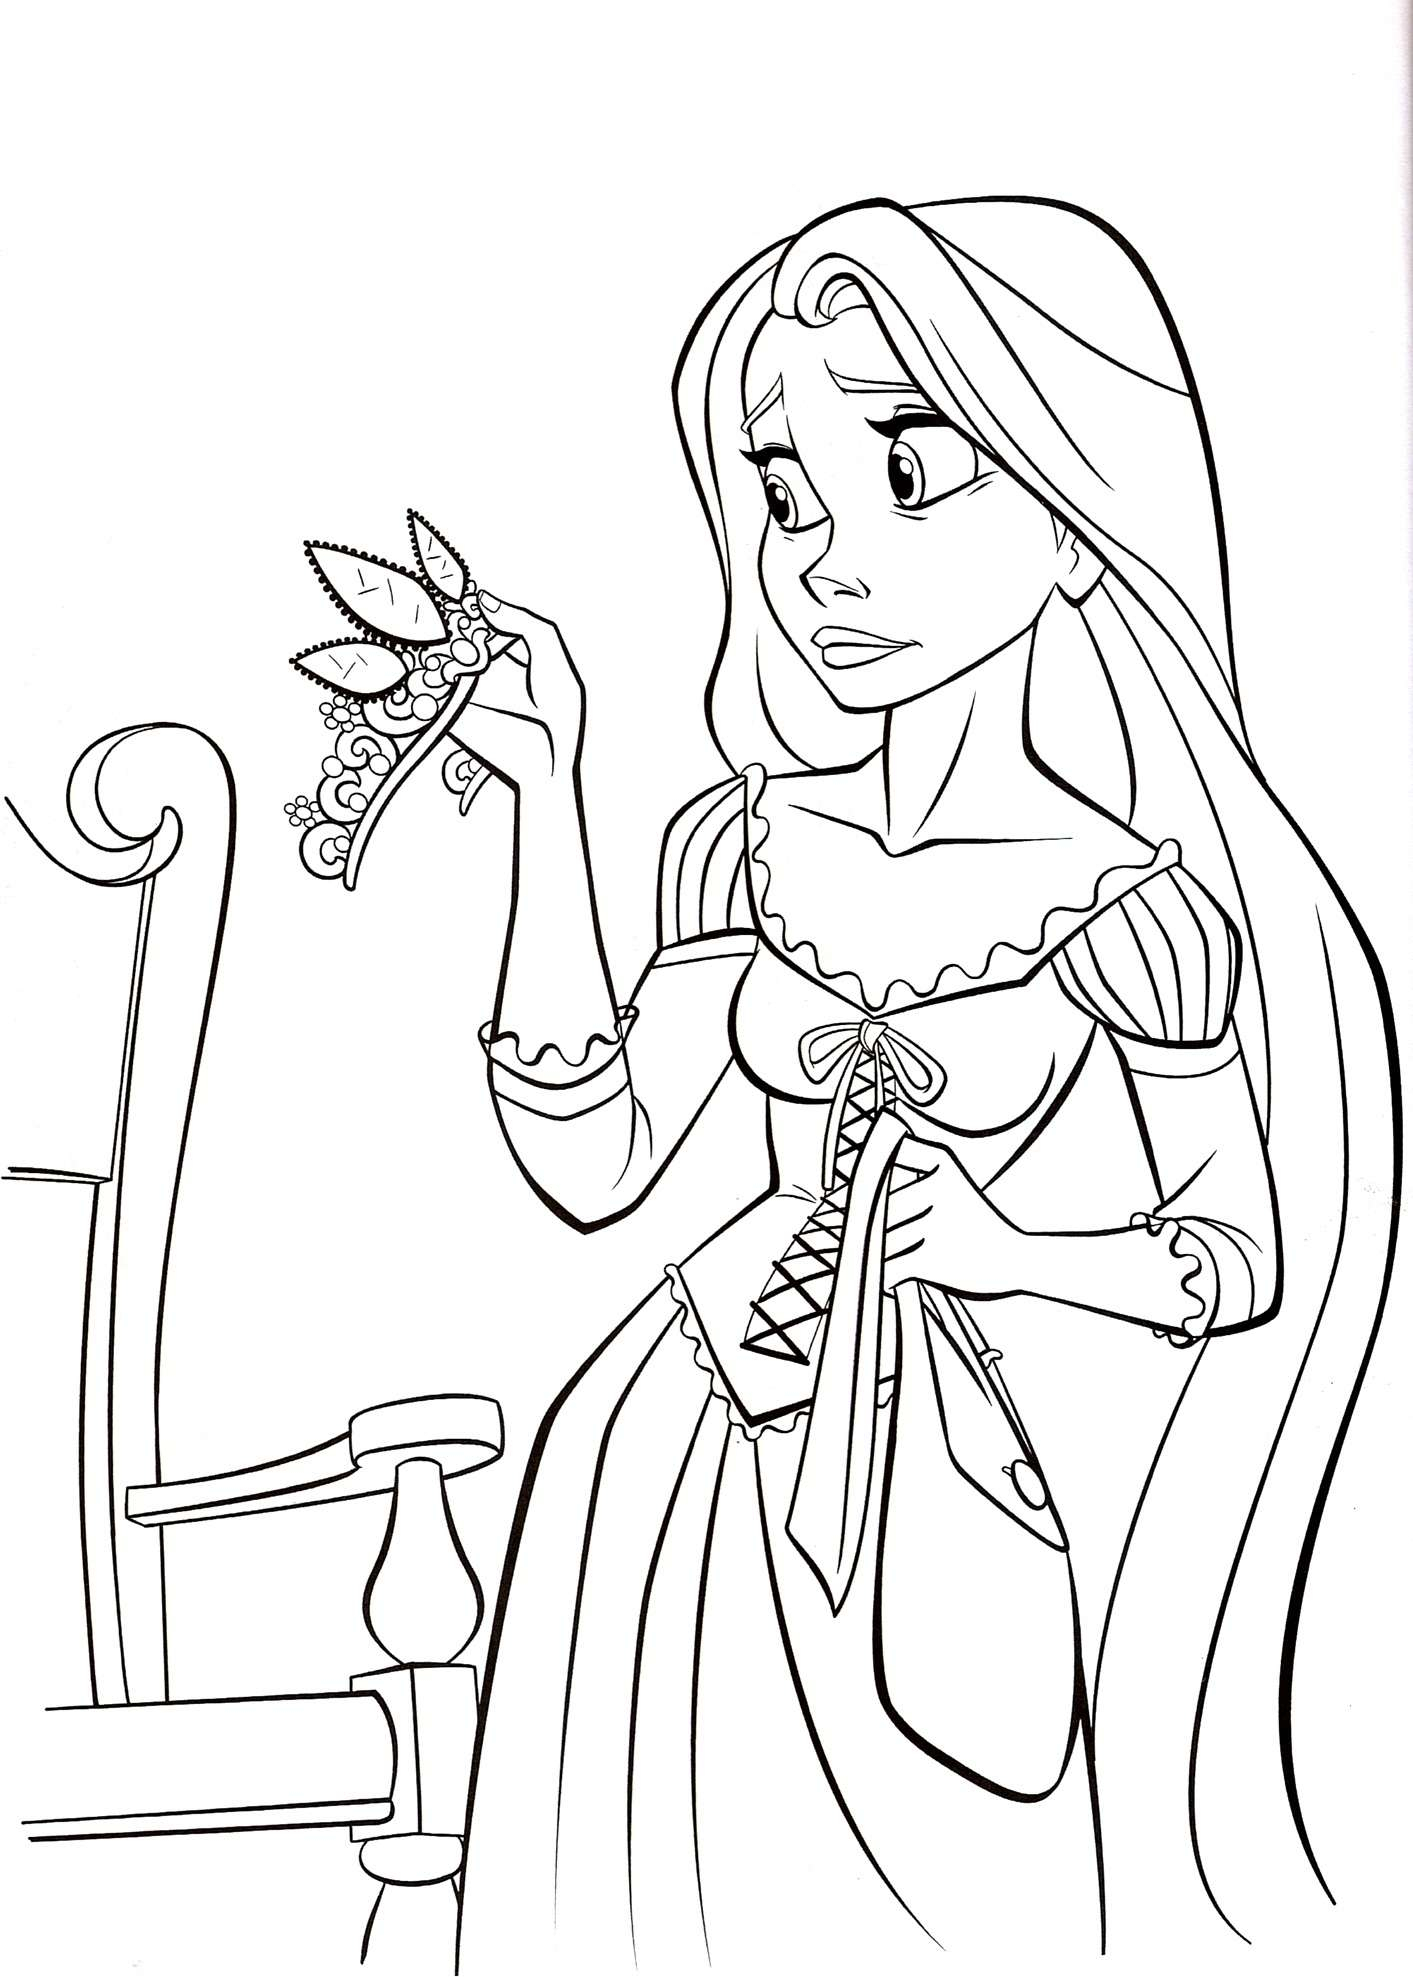 Disney Color Pages Free Coloring Design Free Disney Coloring Pages Design Printable For